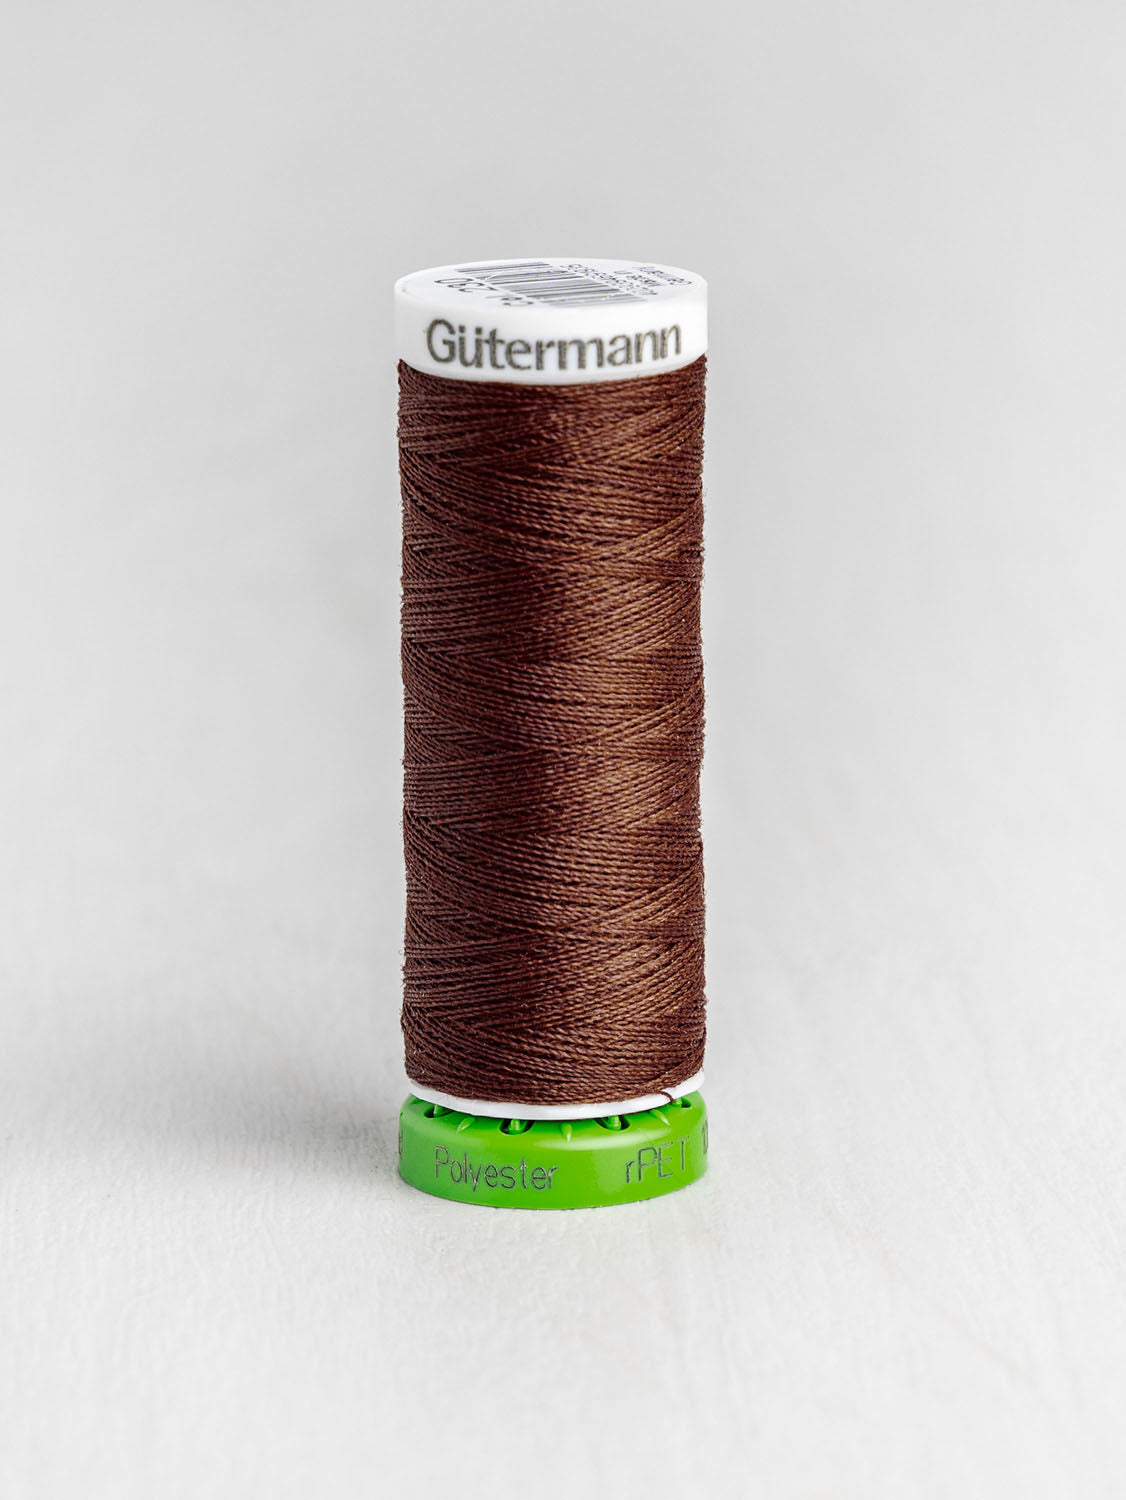 Gütermann All Purpose rPET Recycled Thread - Spiced Chocolate 230 | Core Fabrics